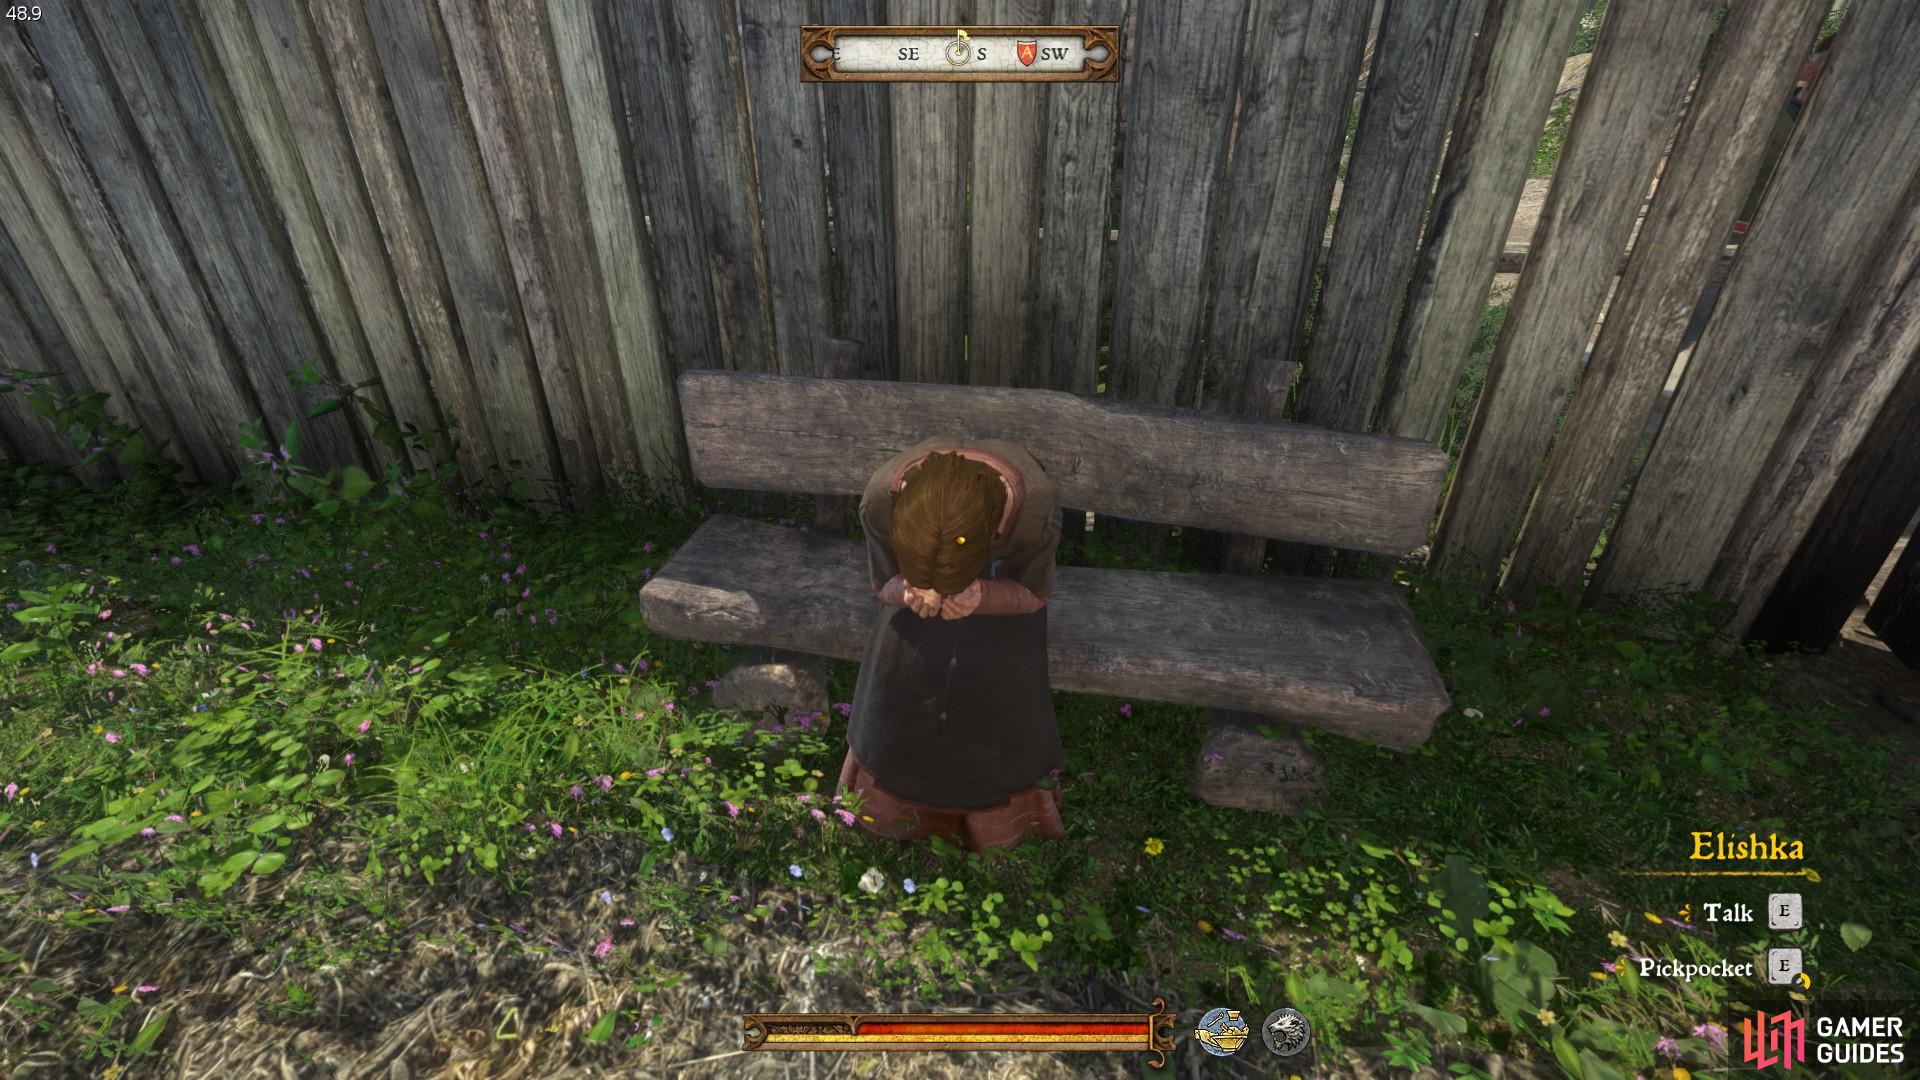 You will find Elishka, the weeping woman, sat on a bench on the north side of the executioner’s house.